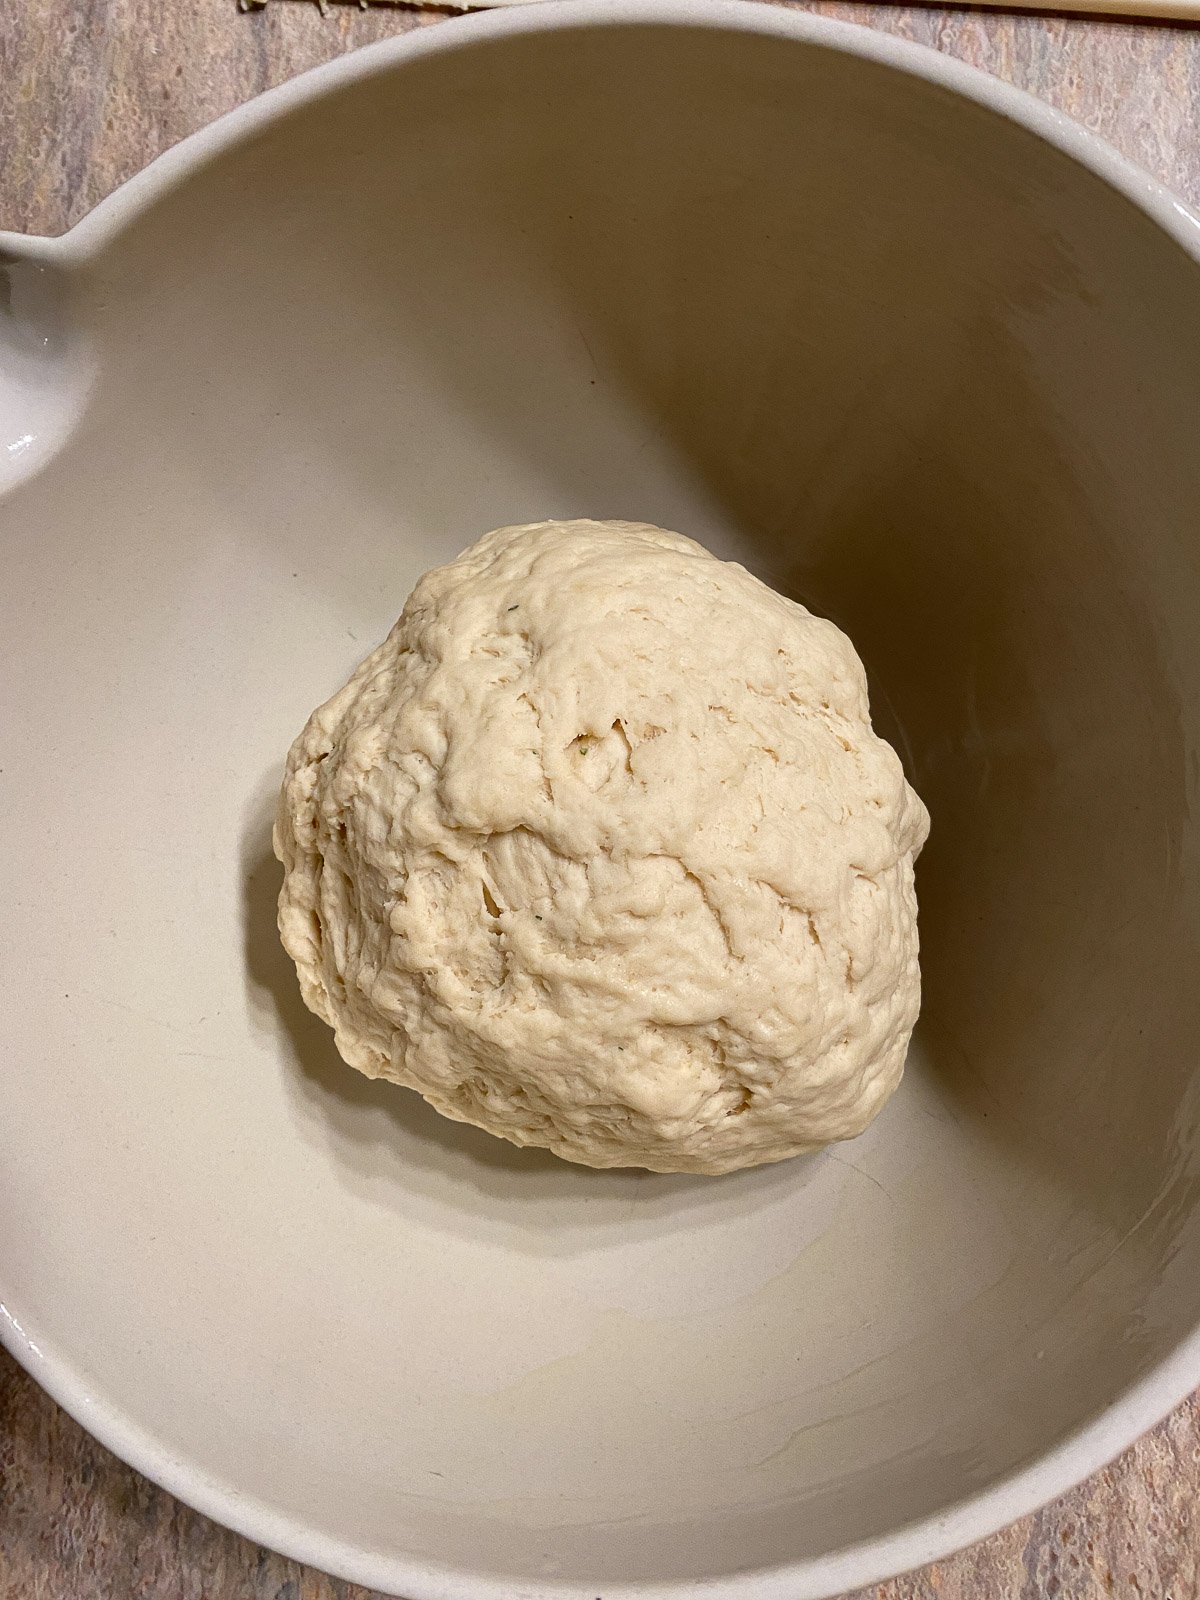 process of forming dough in a white bowl against a light brown surface